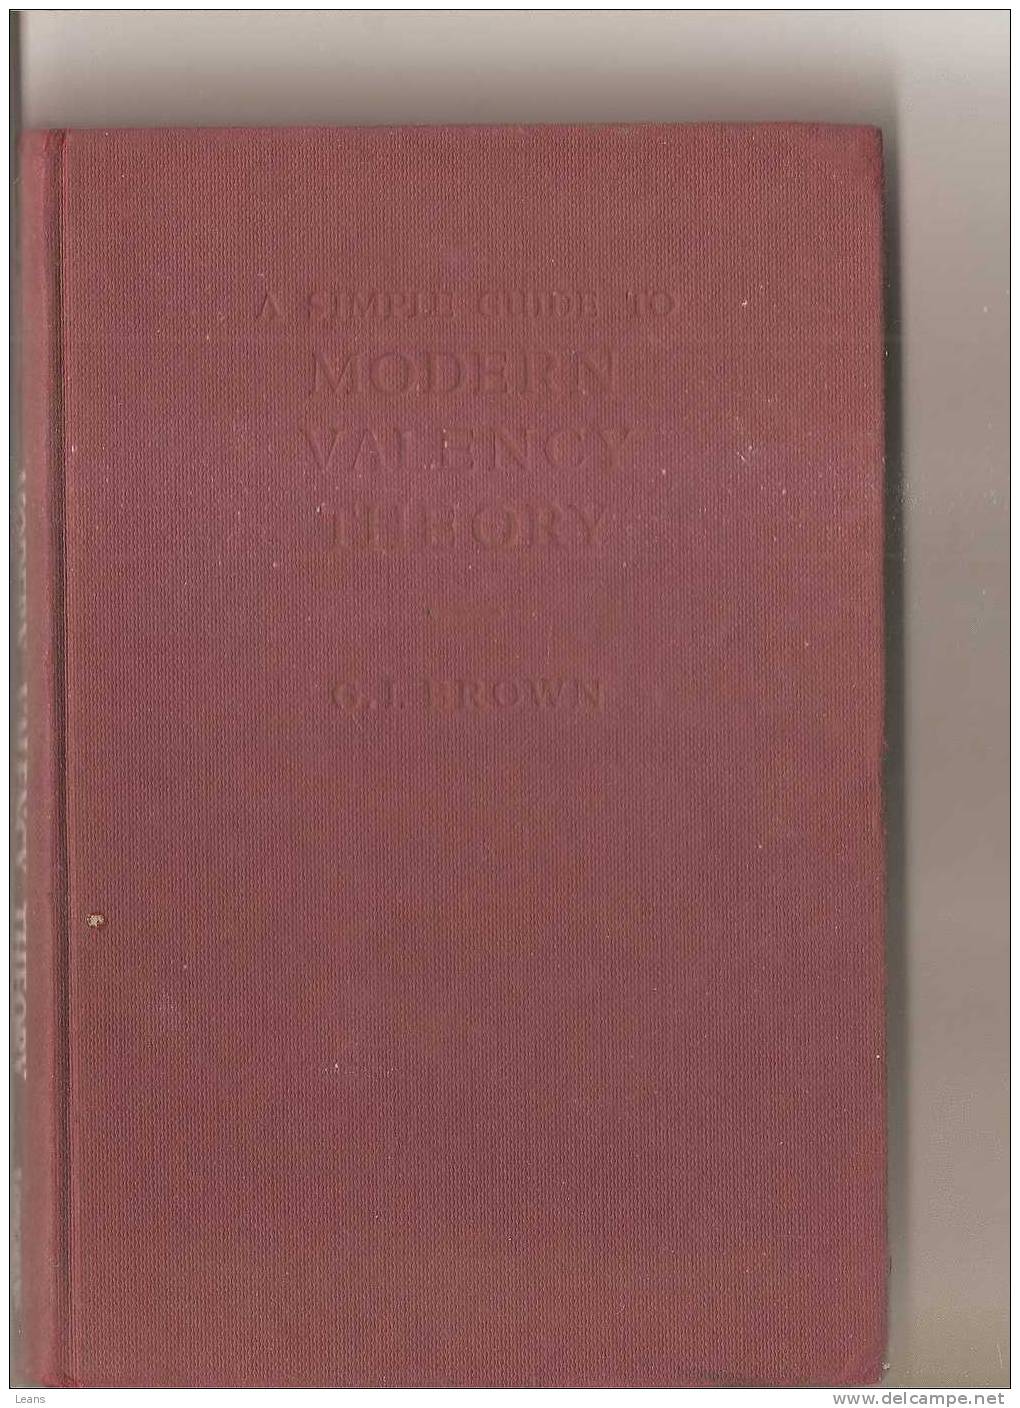 A SIMPLE GUIDE TO MODERN VALENCY THEORY    Ed: BROWN - Scienze